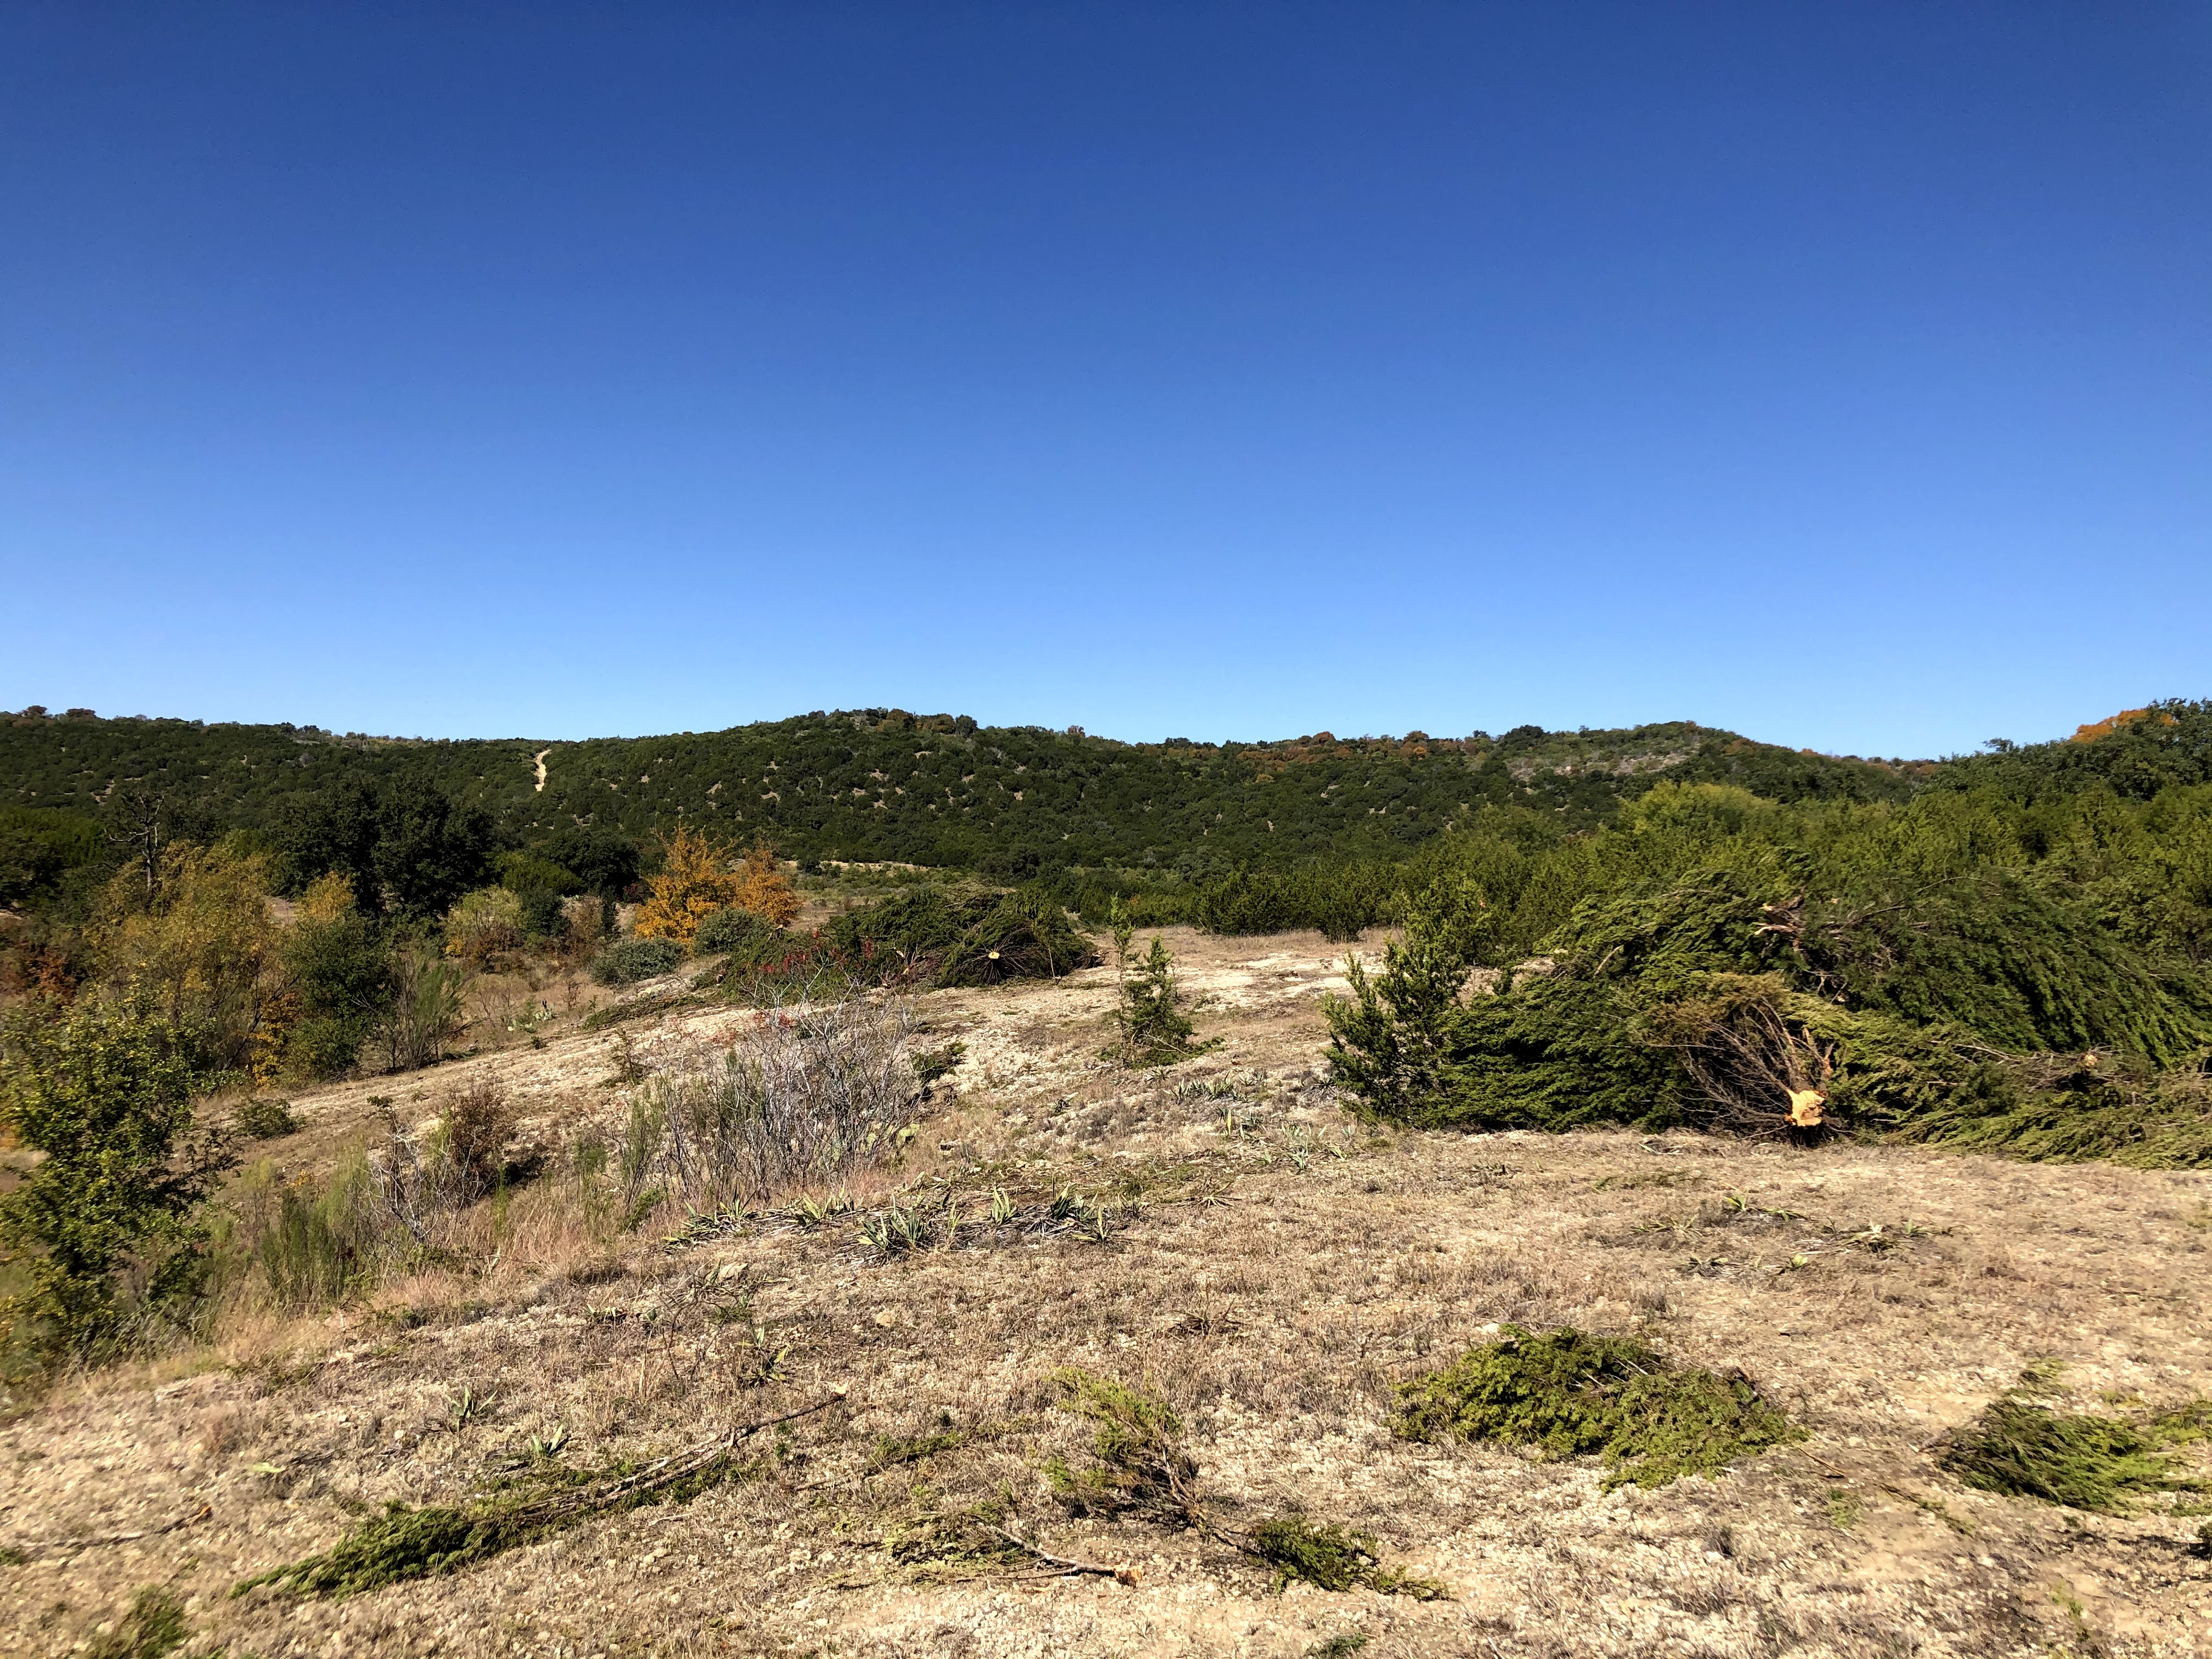 Area on Copeland tract after brush (juniper) removal in 2020